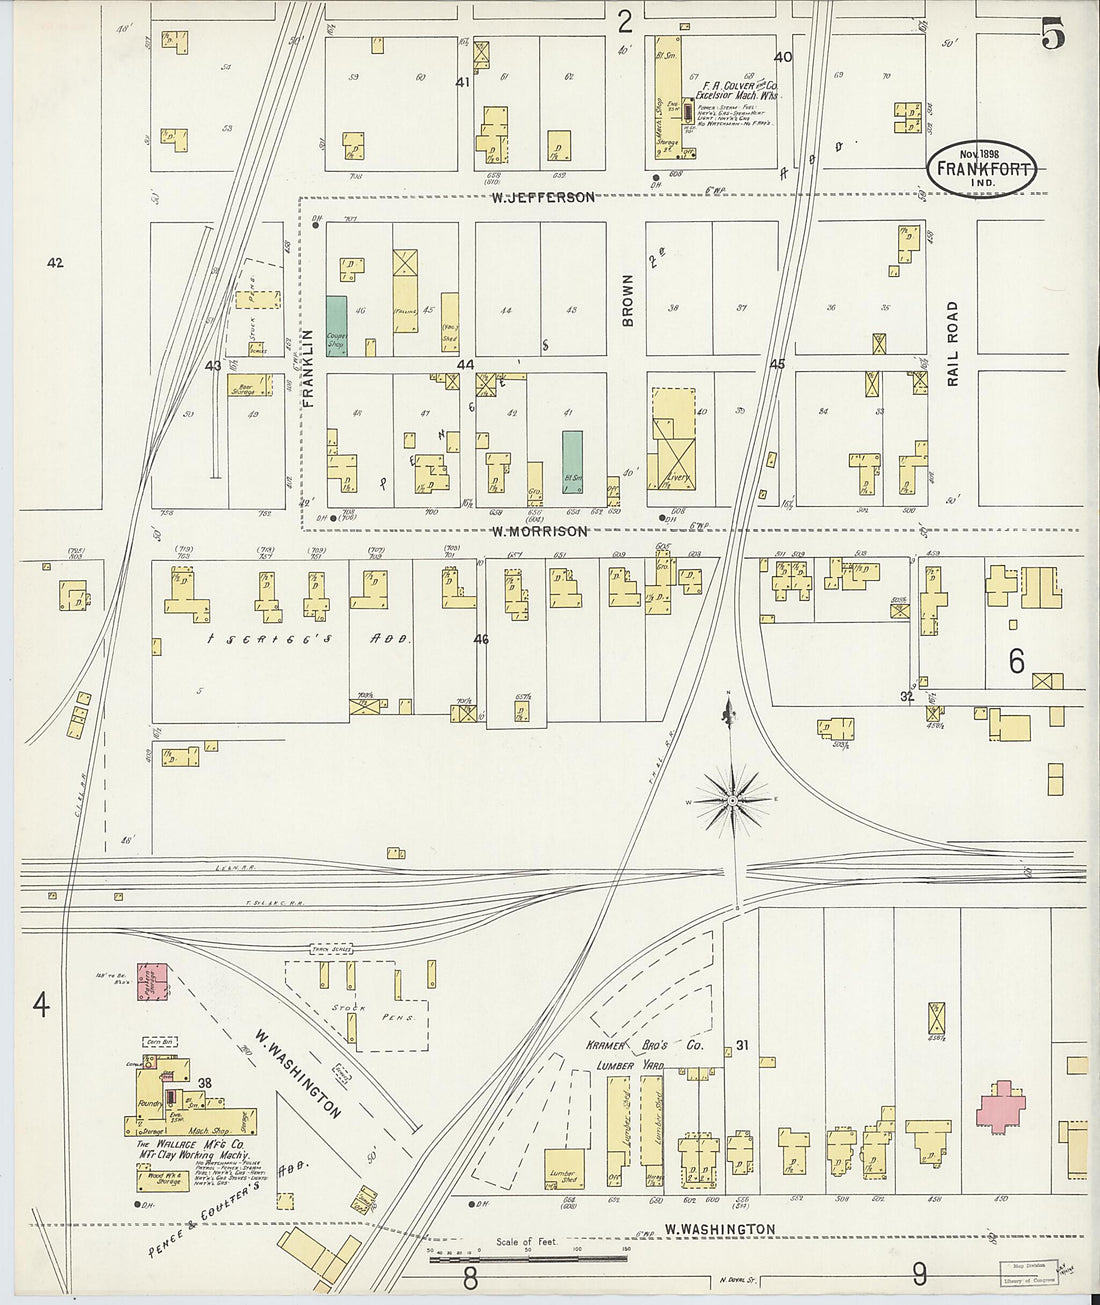 This old map of Frankfort, Clinton County, Indiana was created by Sanborn Map Company in 1898